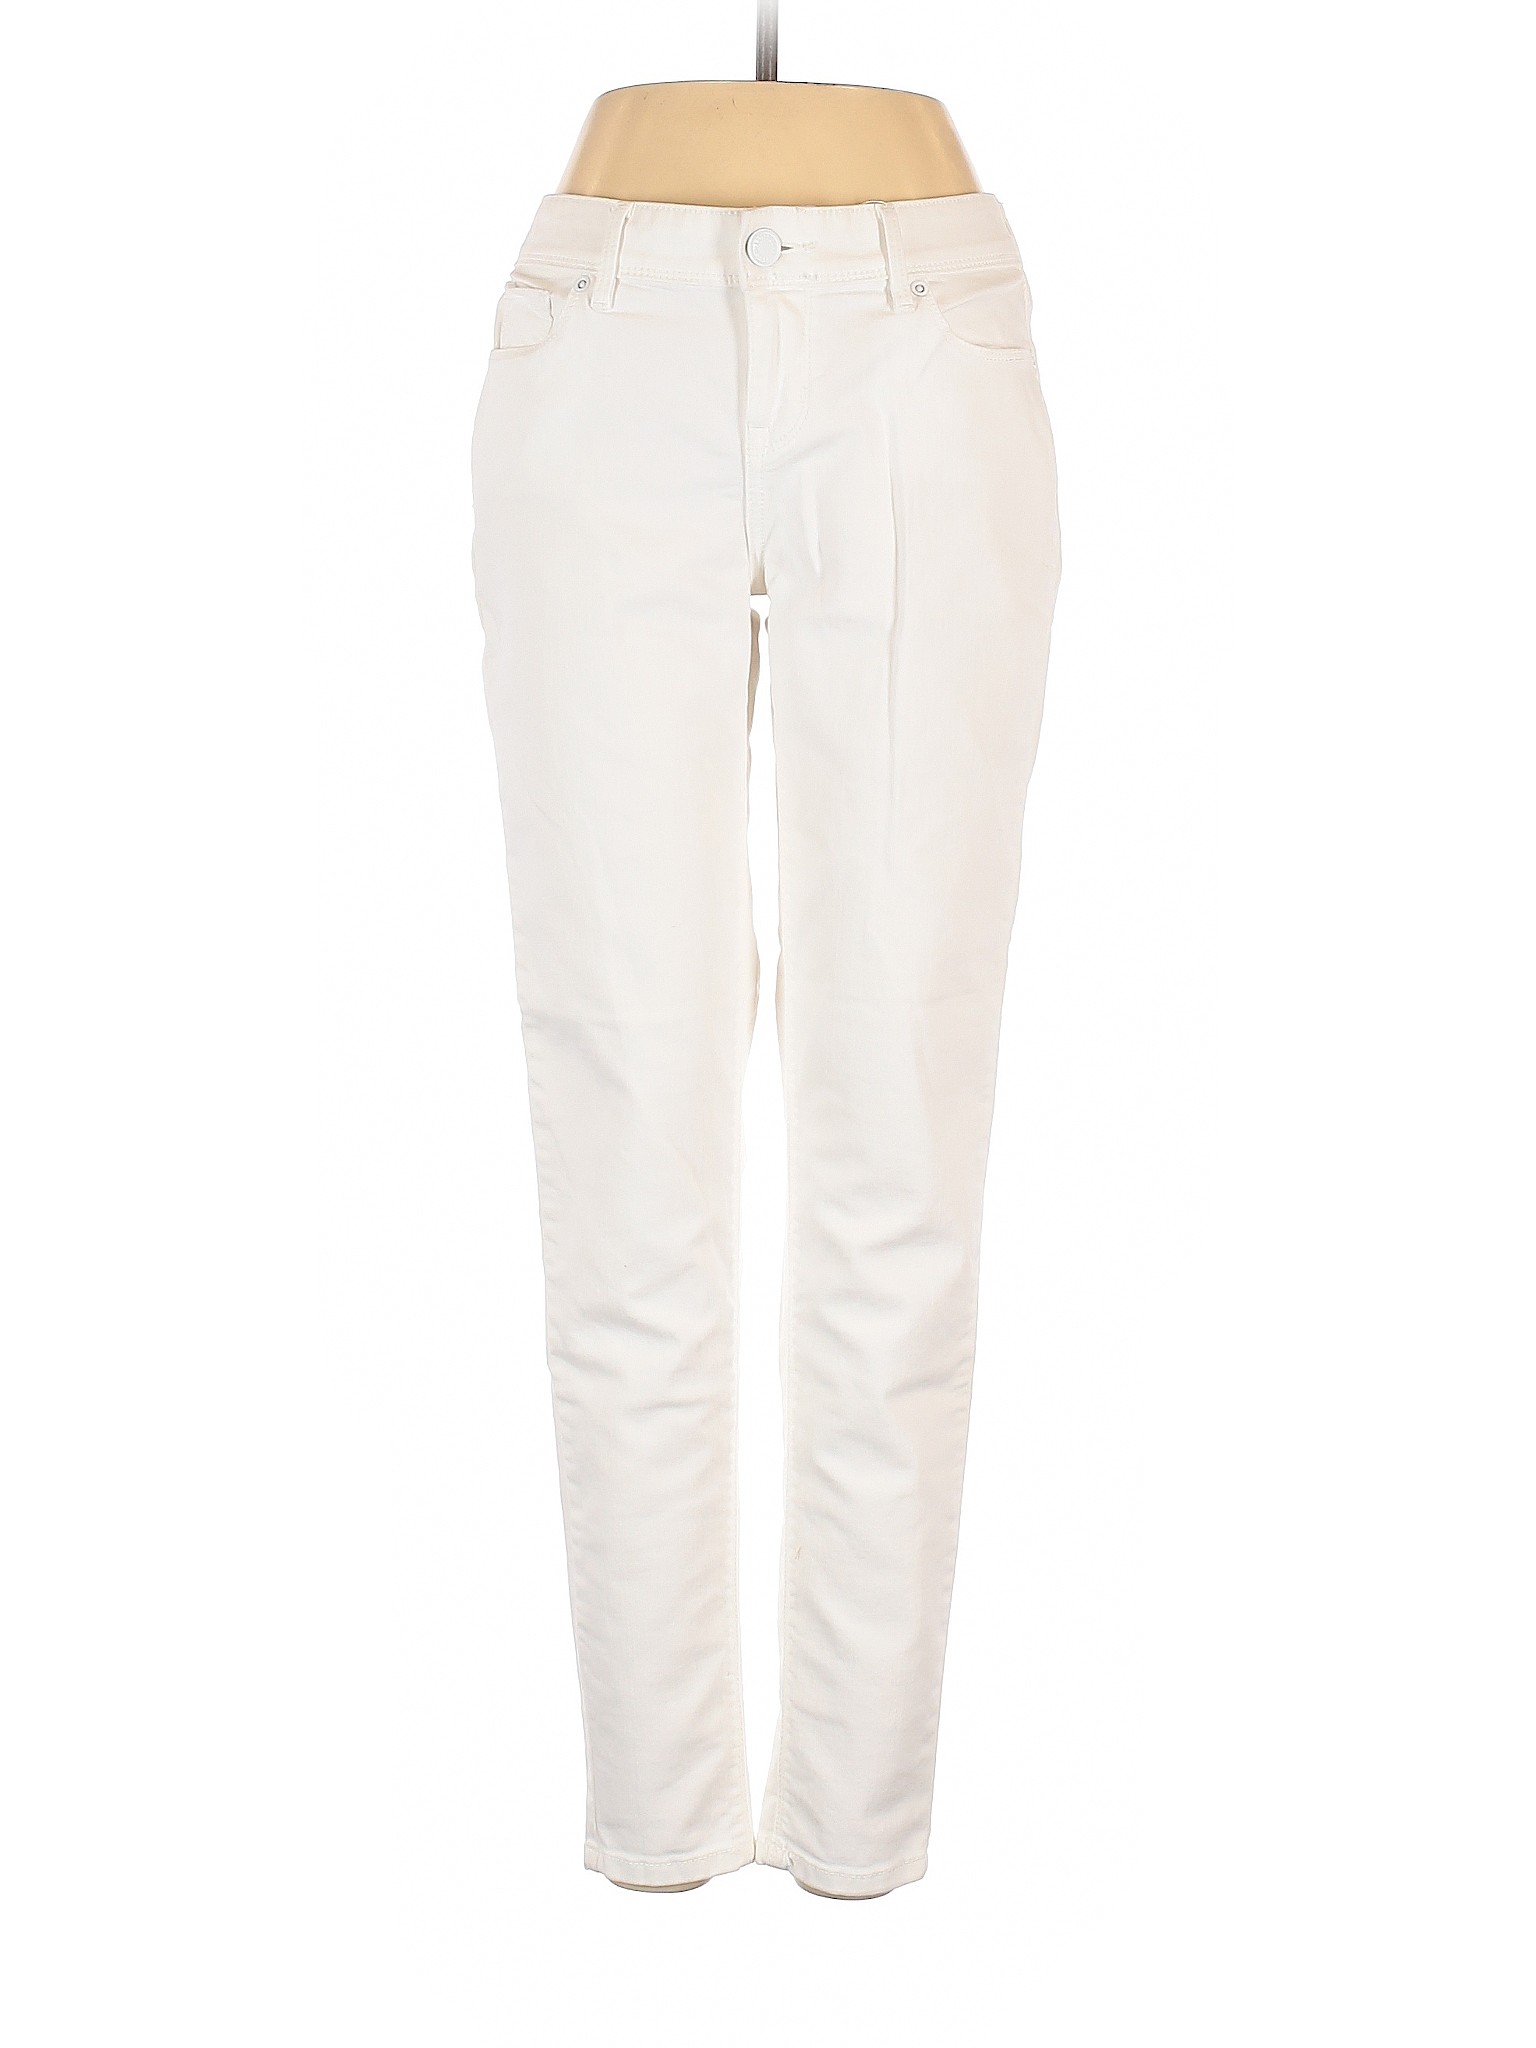 The Limited Women White Jeans 4 | eBay